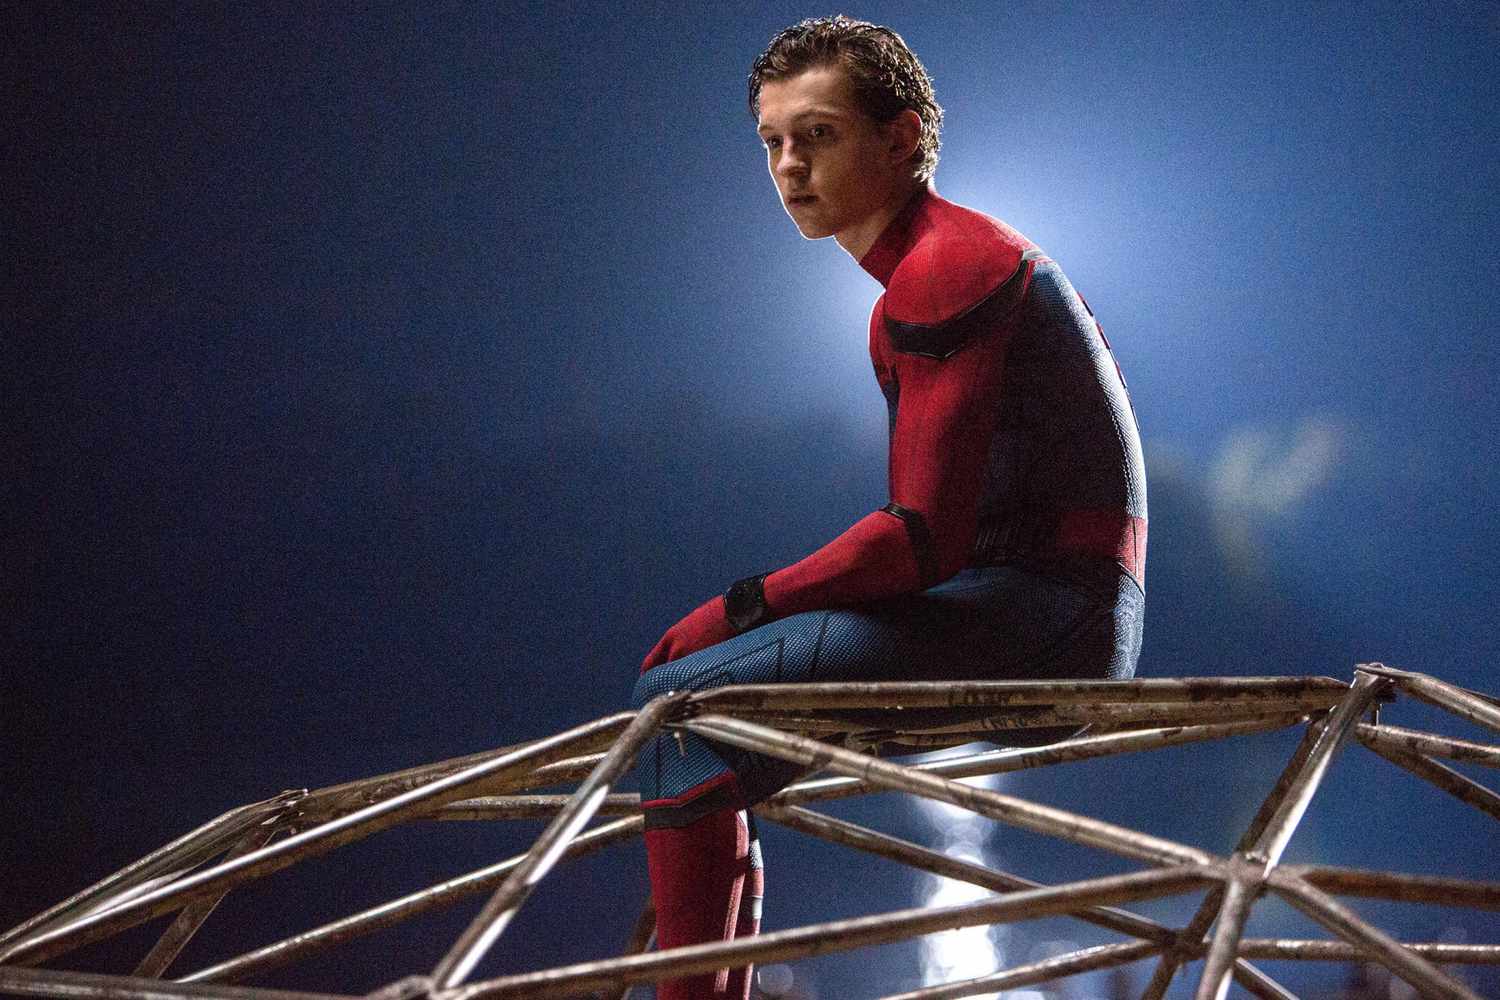 Russo brothers say they fought Sony to cast Tom Holland as Spider-Man - Entertainment Weekly